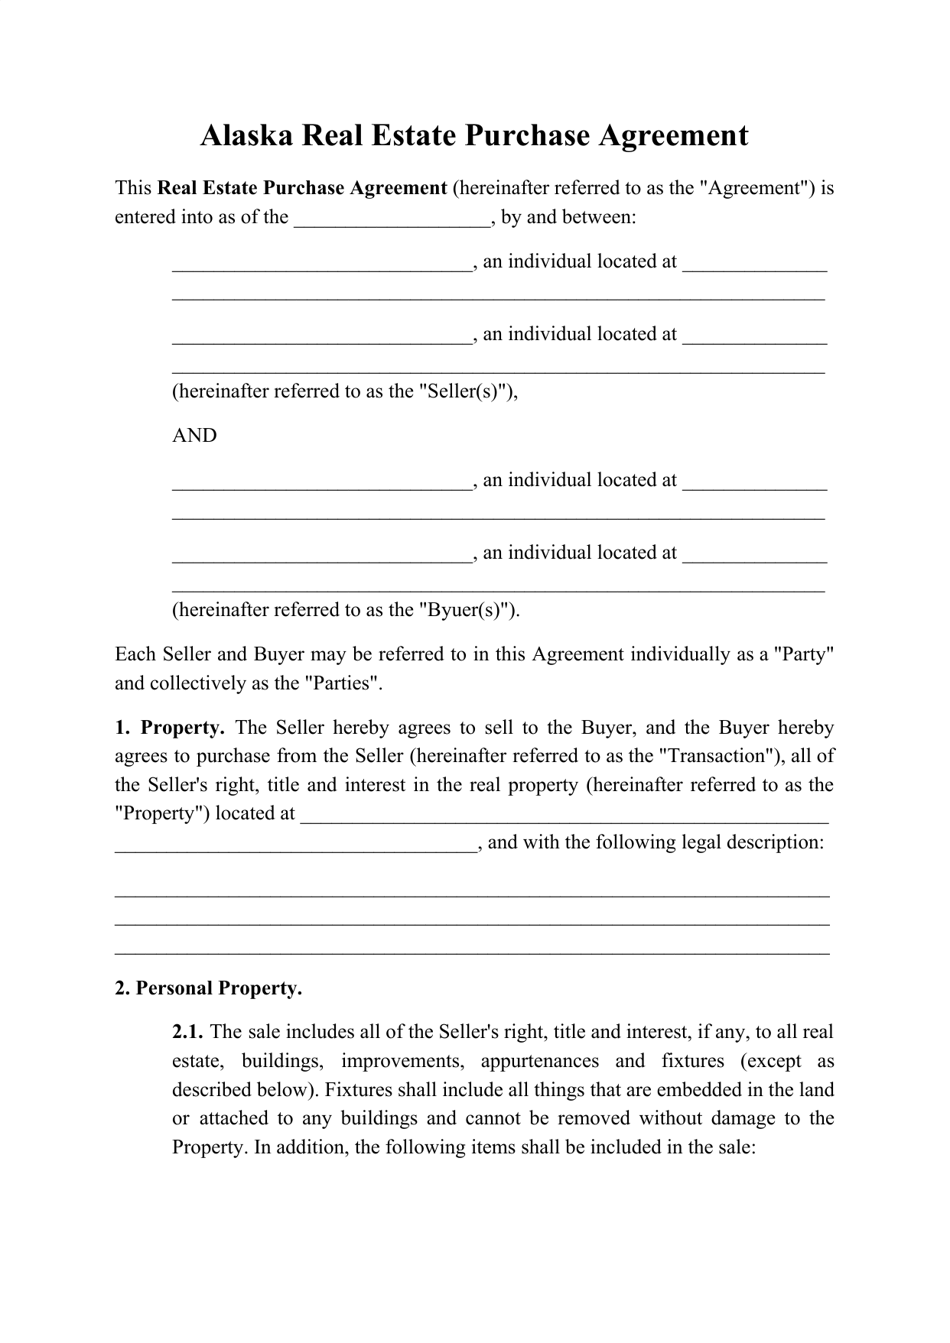 Real Estate Purchase Agreement Template - Alaska, Page 1